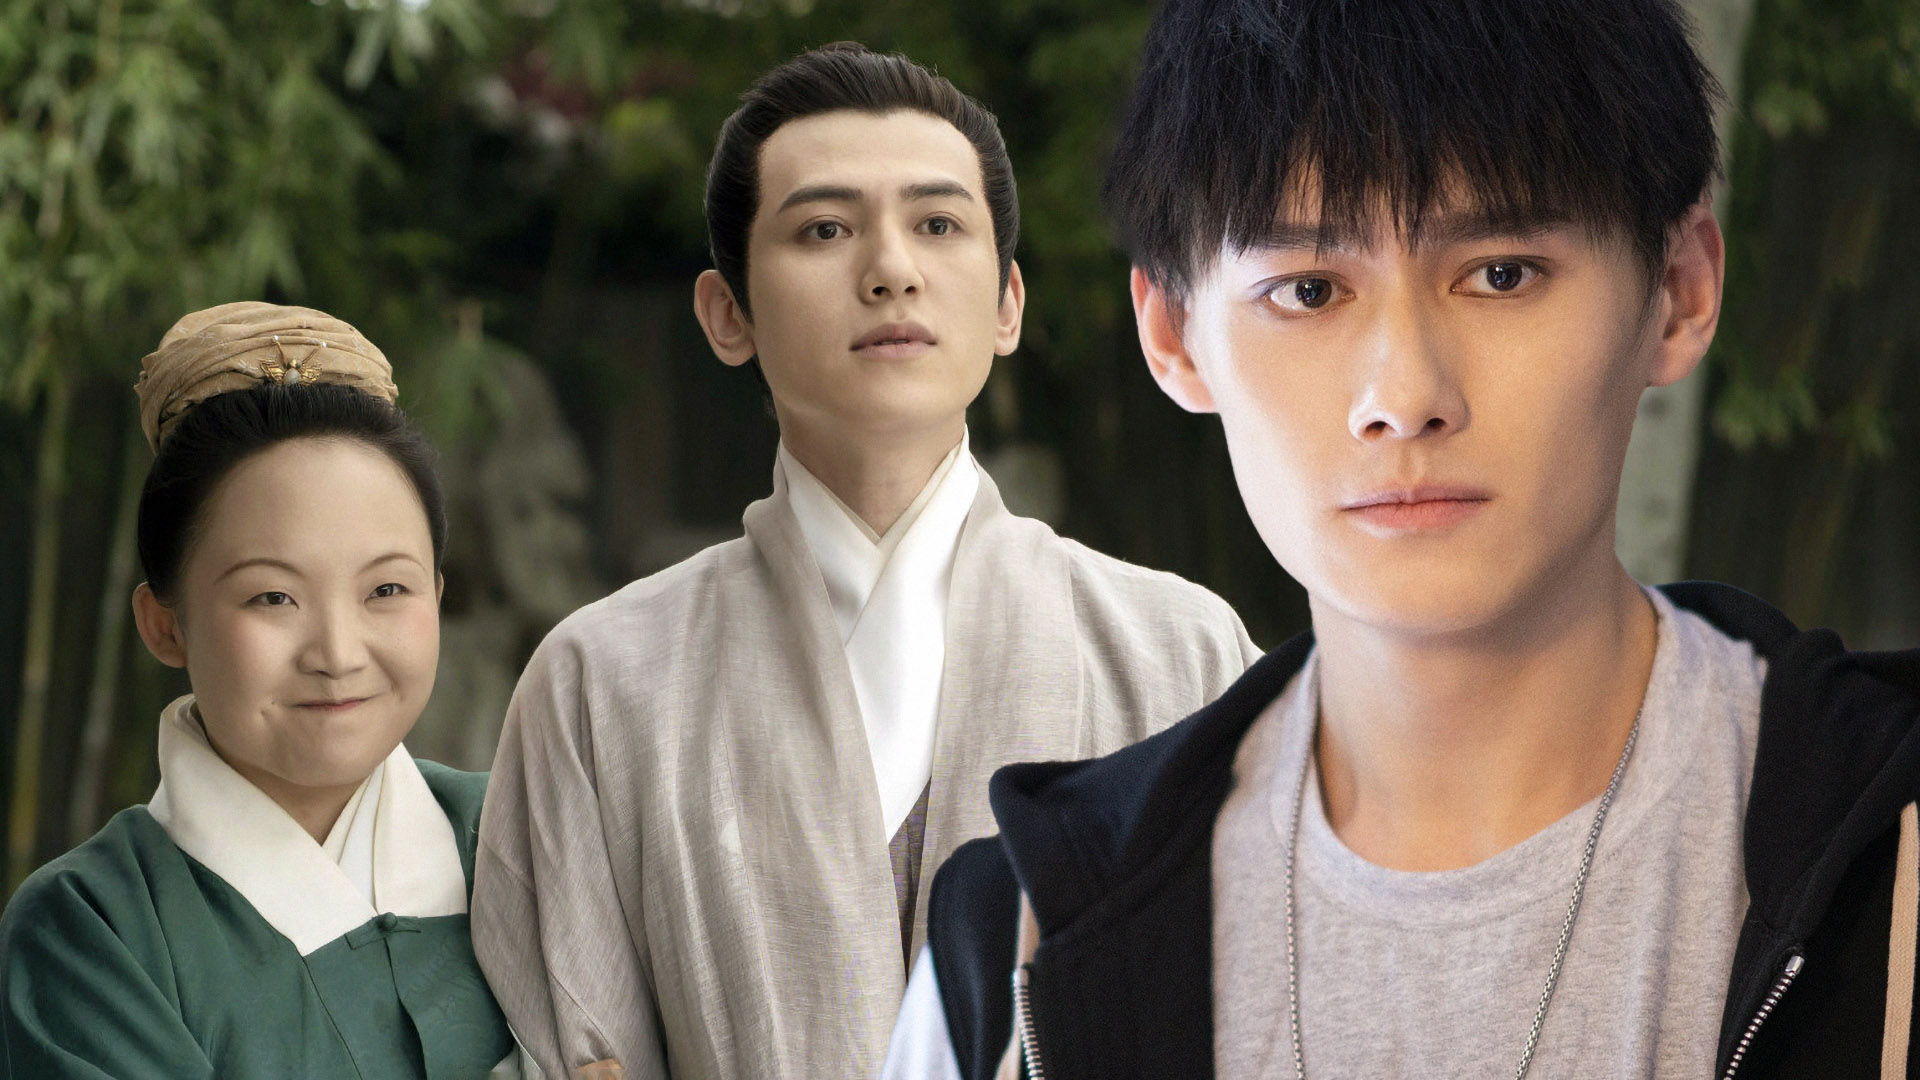 From Cute to Poignant: Top 10 Chinese Romance Dramas on Amazon Prime Video